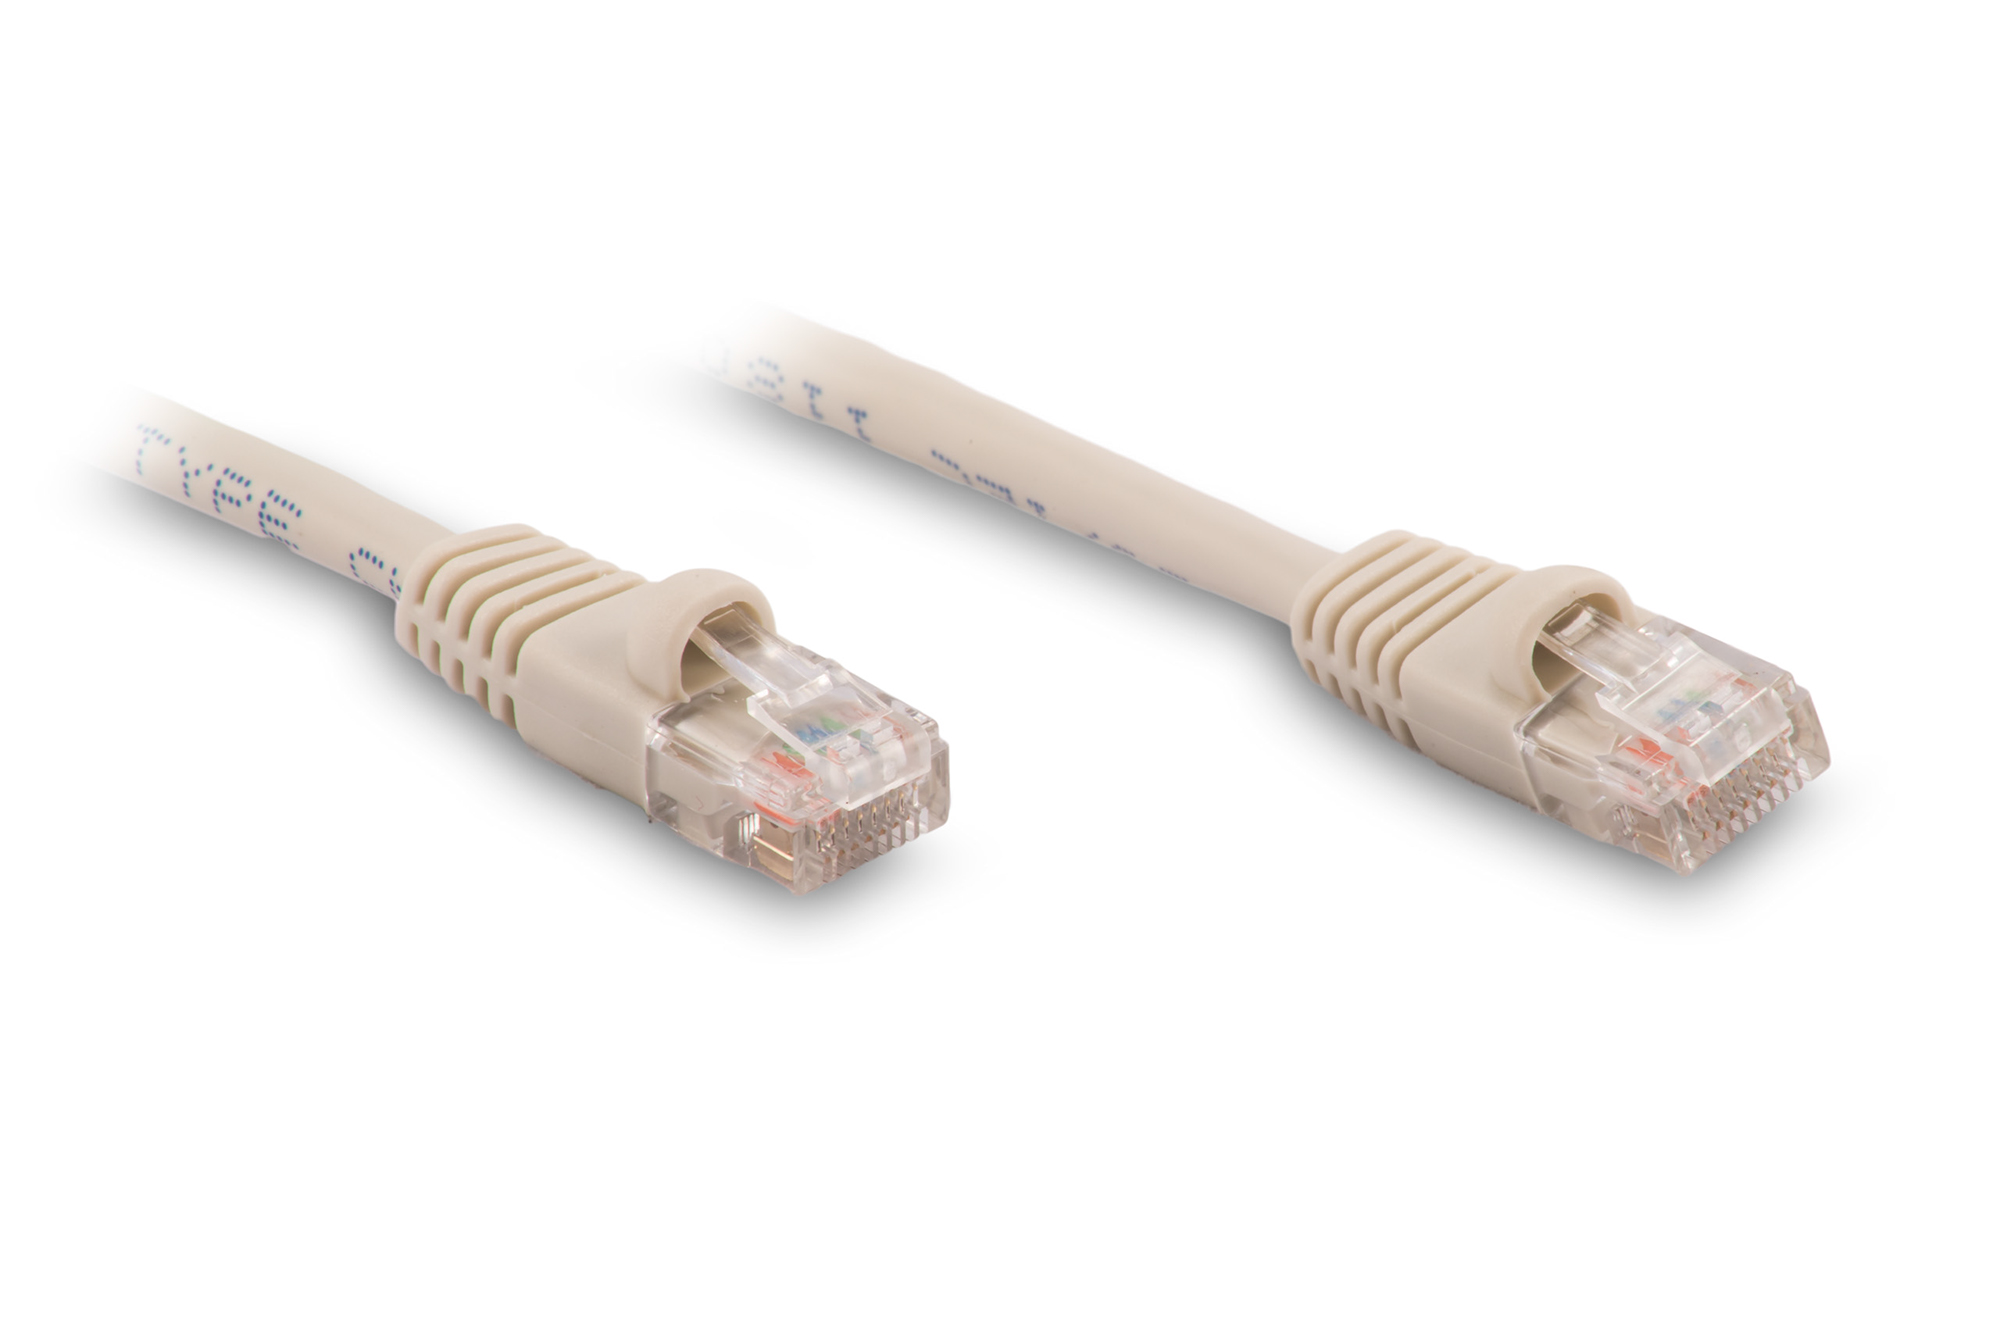 4ft Cat6 Ethernet Patch Cable - Gray Color - Snagless Boot